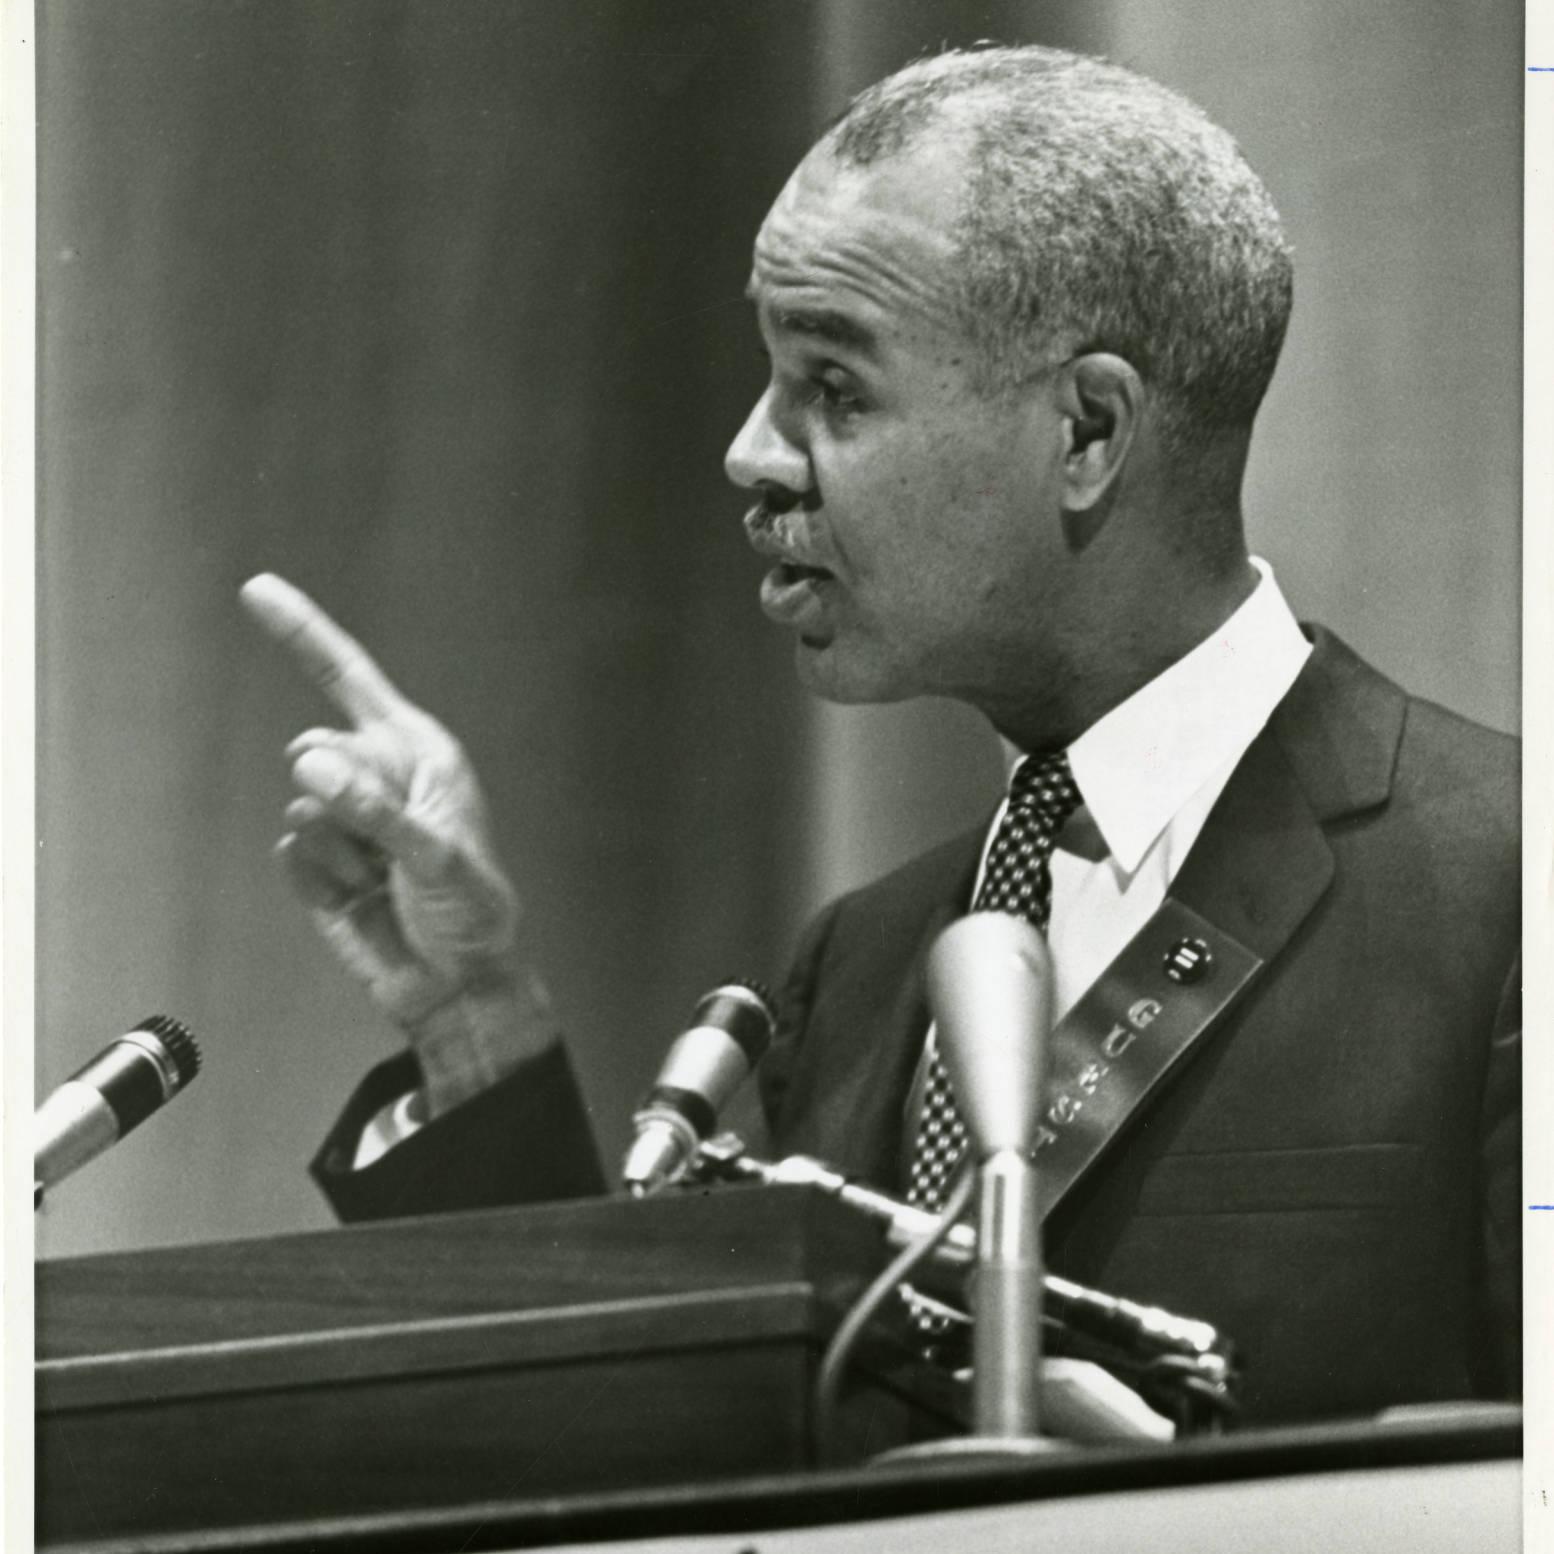 NAACP Director Roy Wilkins at a podium